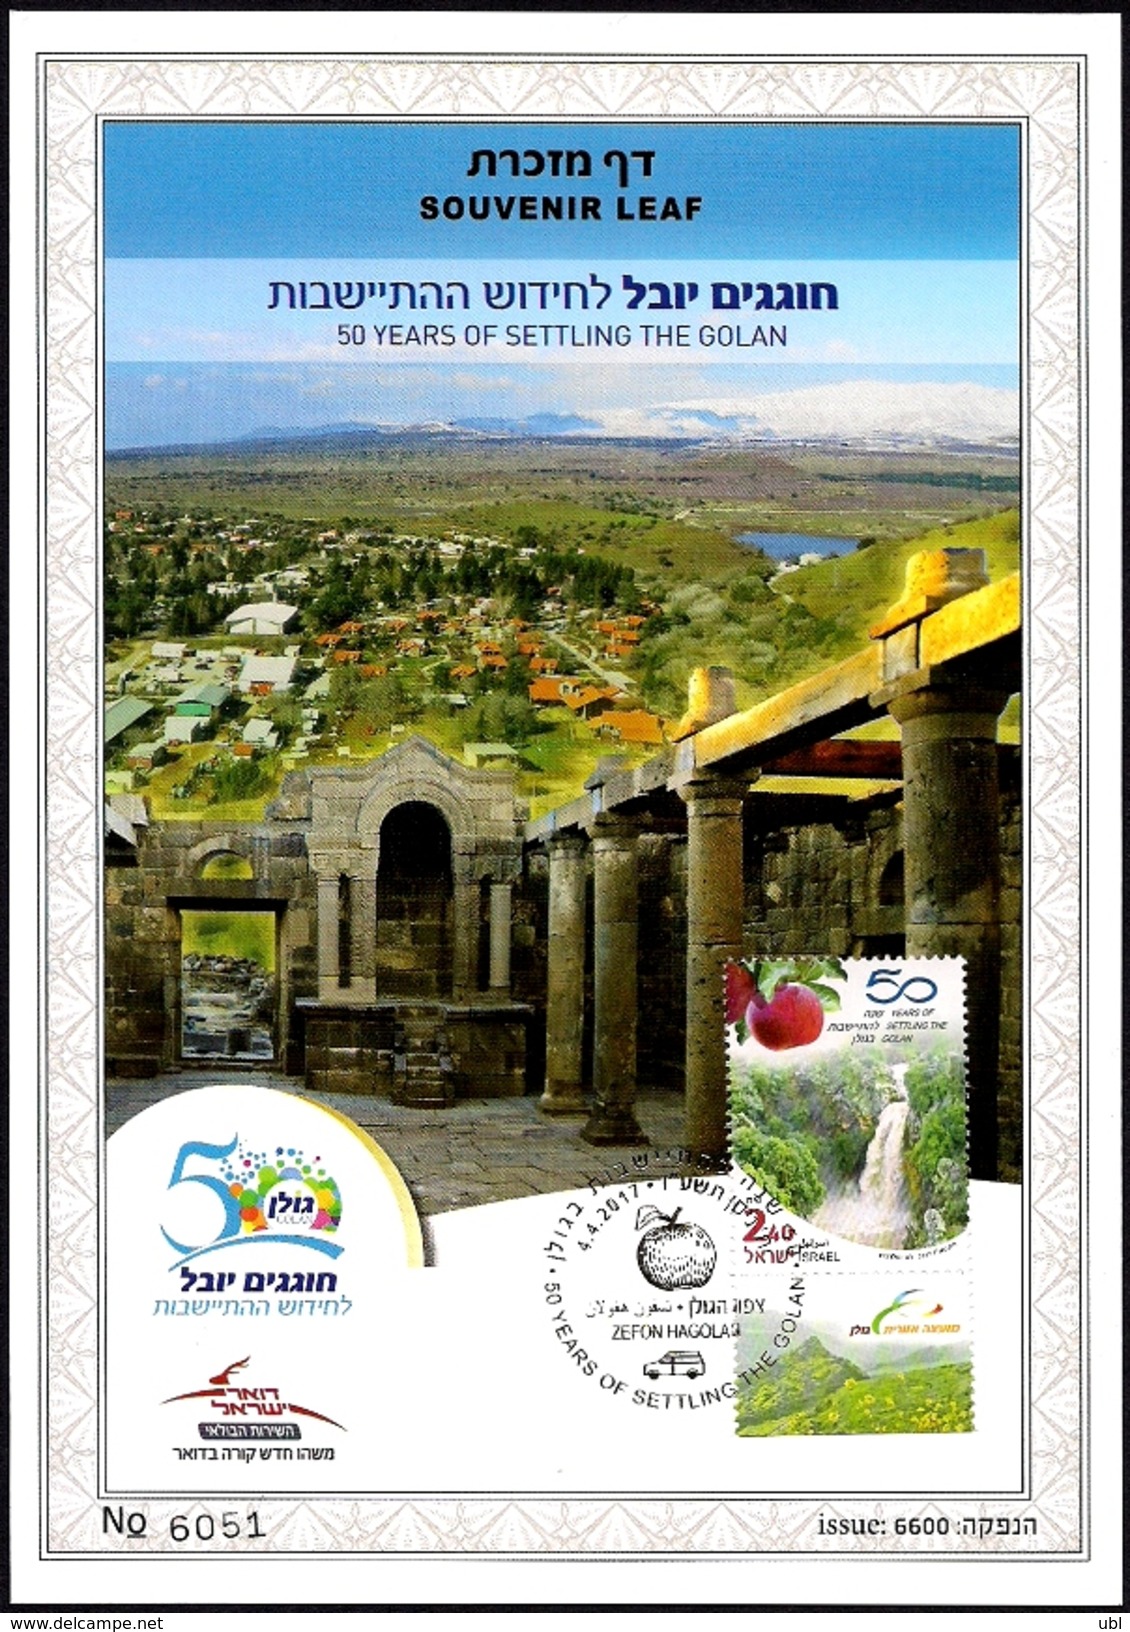 ISRAEL 2017 - 50 Years Of Settling The Golan - Ancient Synagogue - Waterfall - Souvenir Leaf - Archaeology